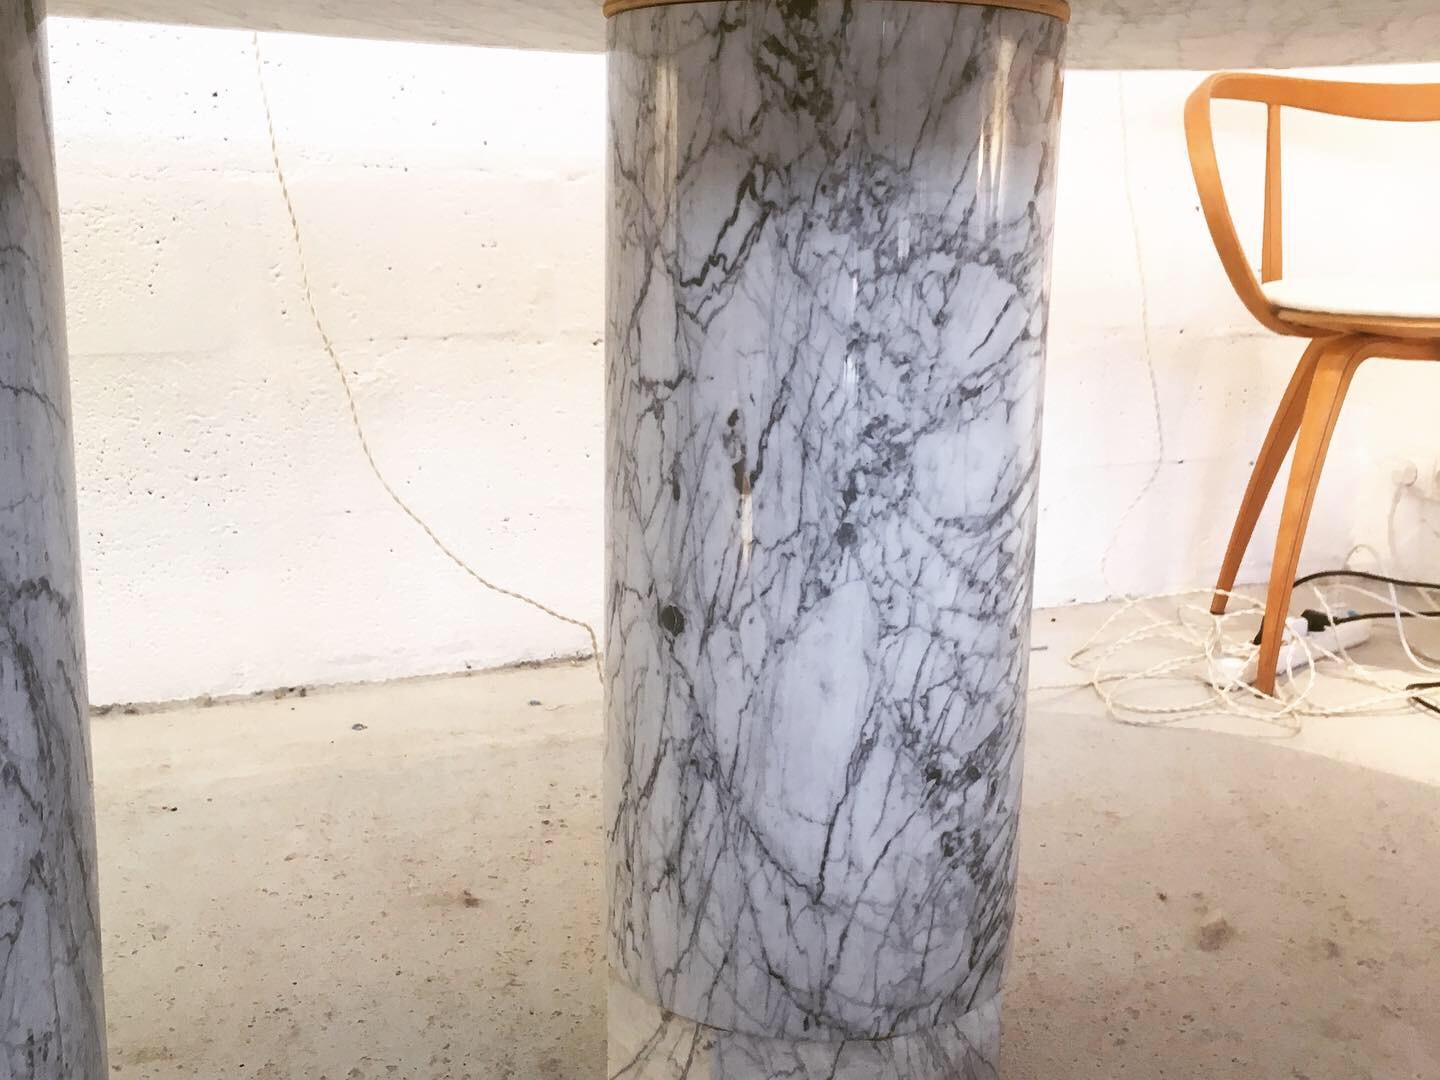 Modern Adolfo Natalini Marble Table Sole e Luna for UP and UP, circa 1990